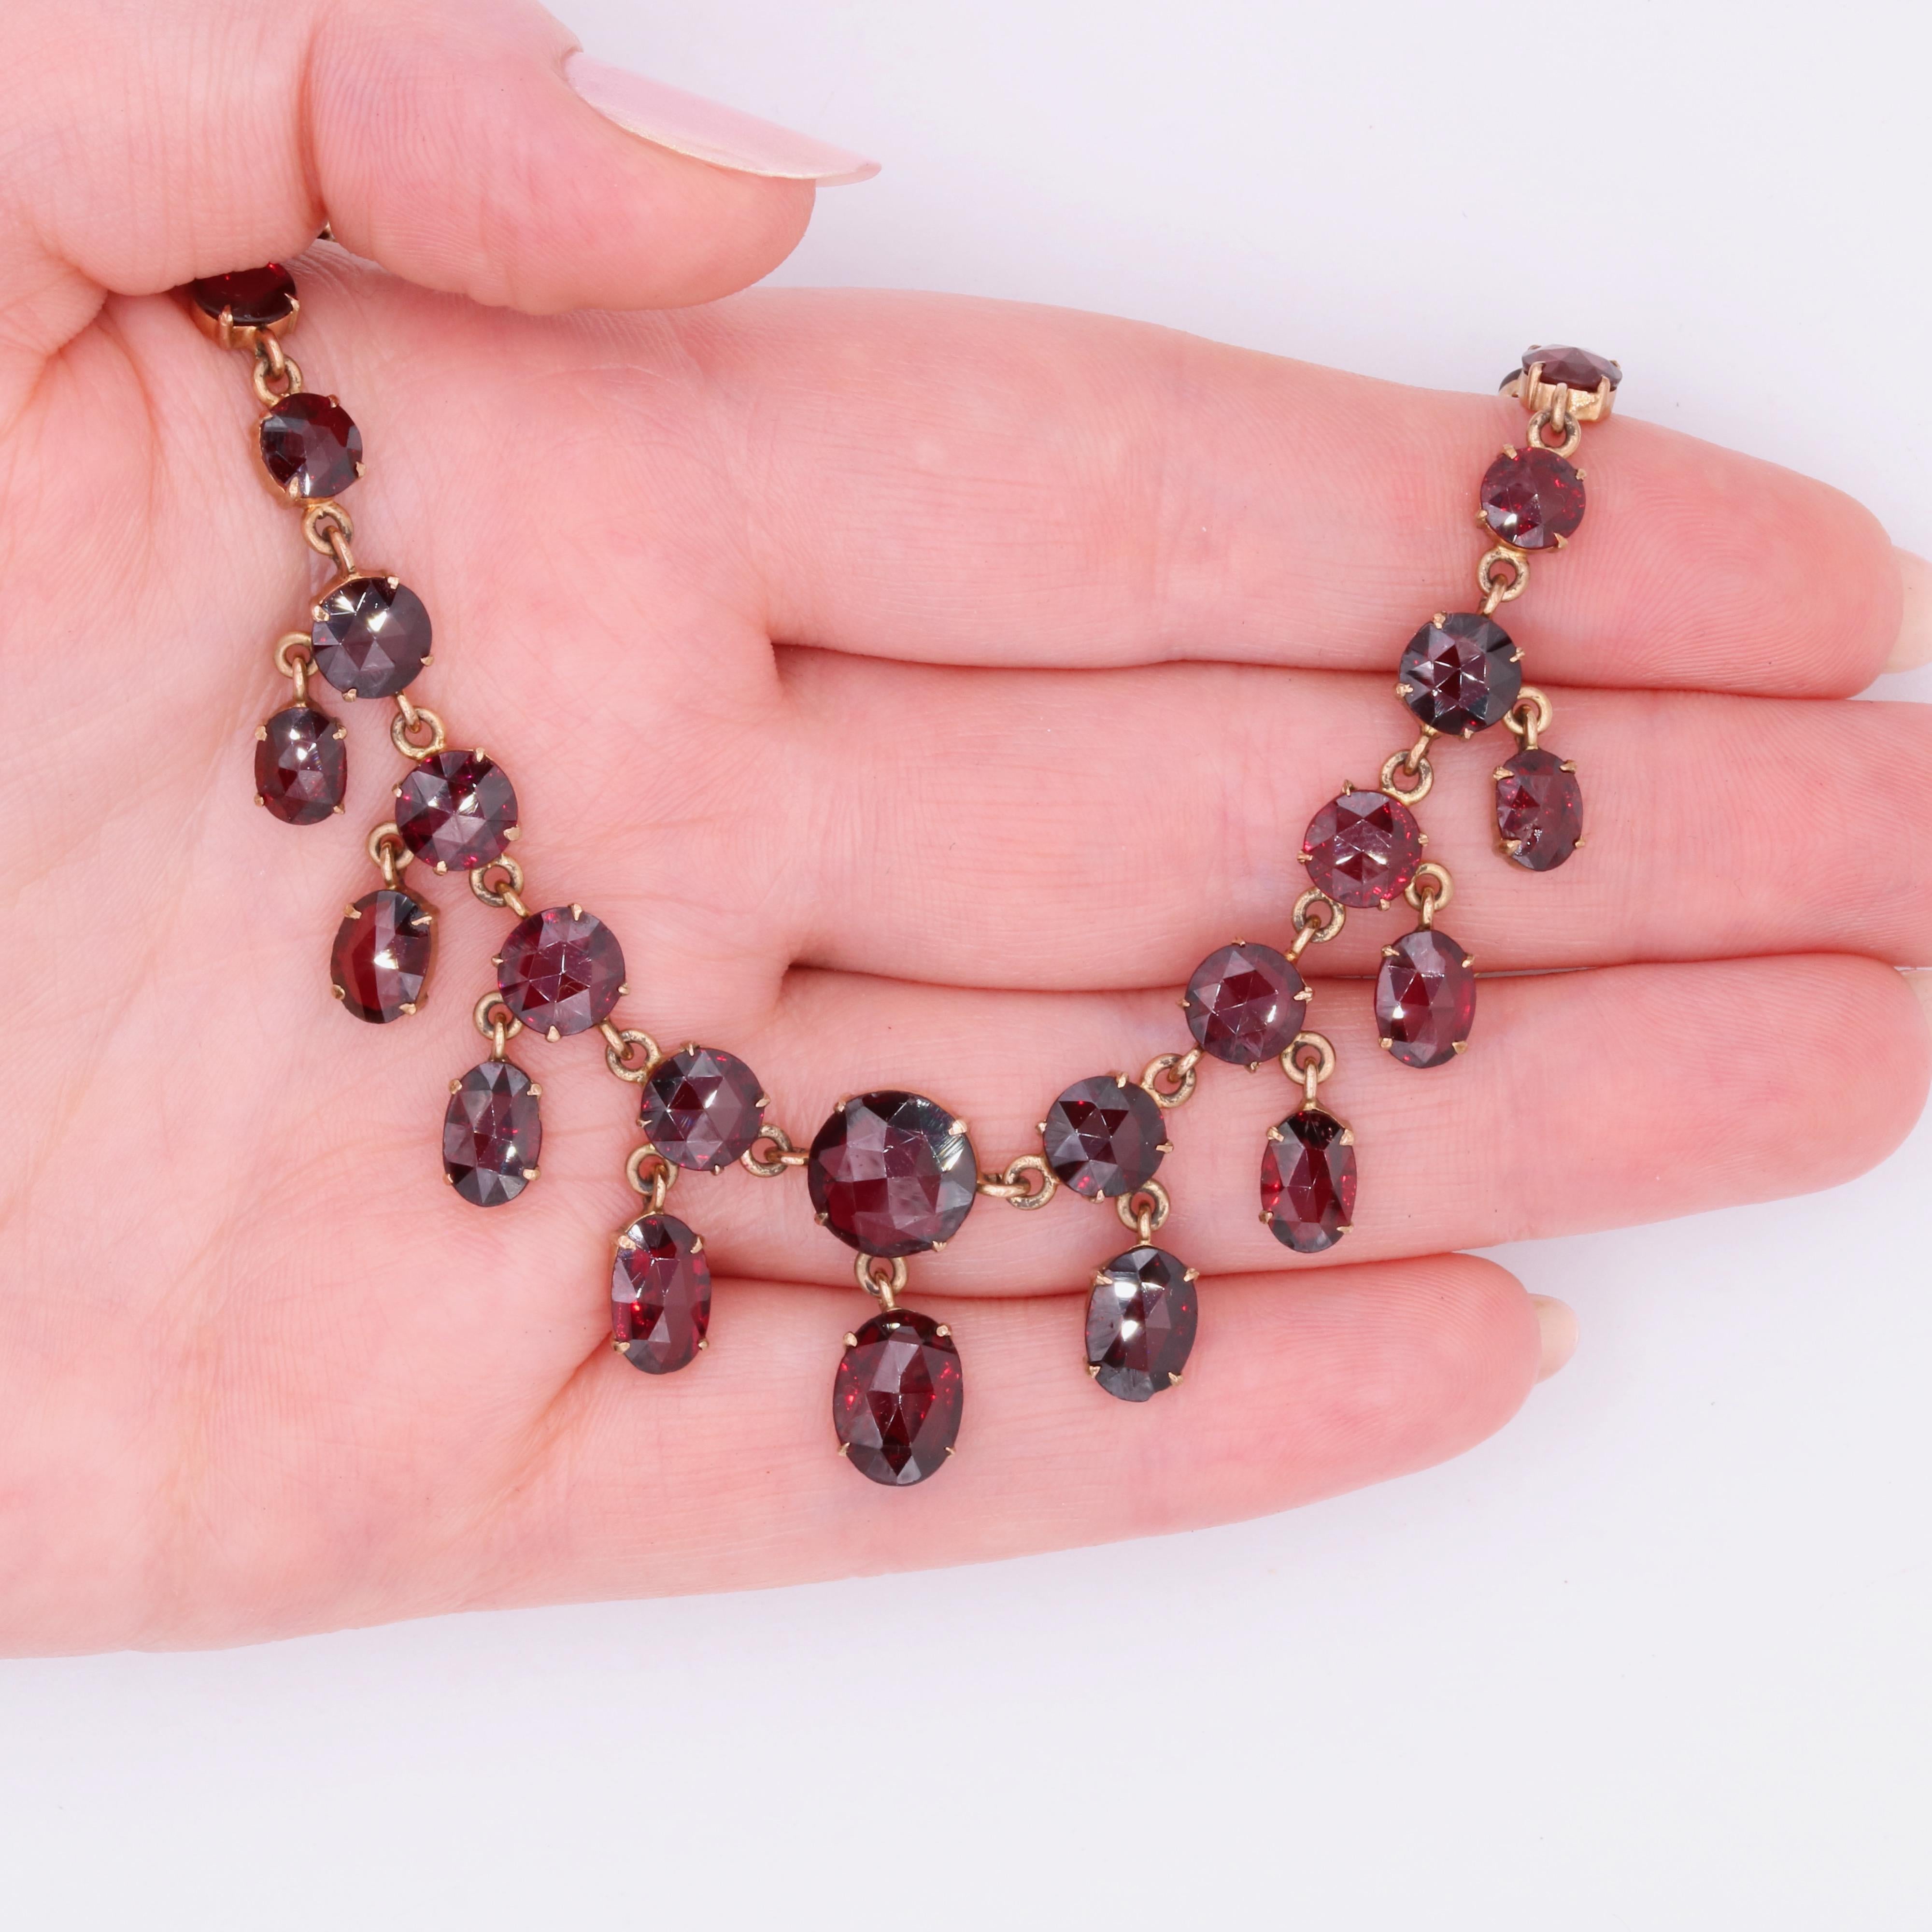 Antique Victorian 1870s Gold 48ctw Garnet Fringe Necklace in Original Fitted Box For Sale 7